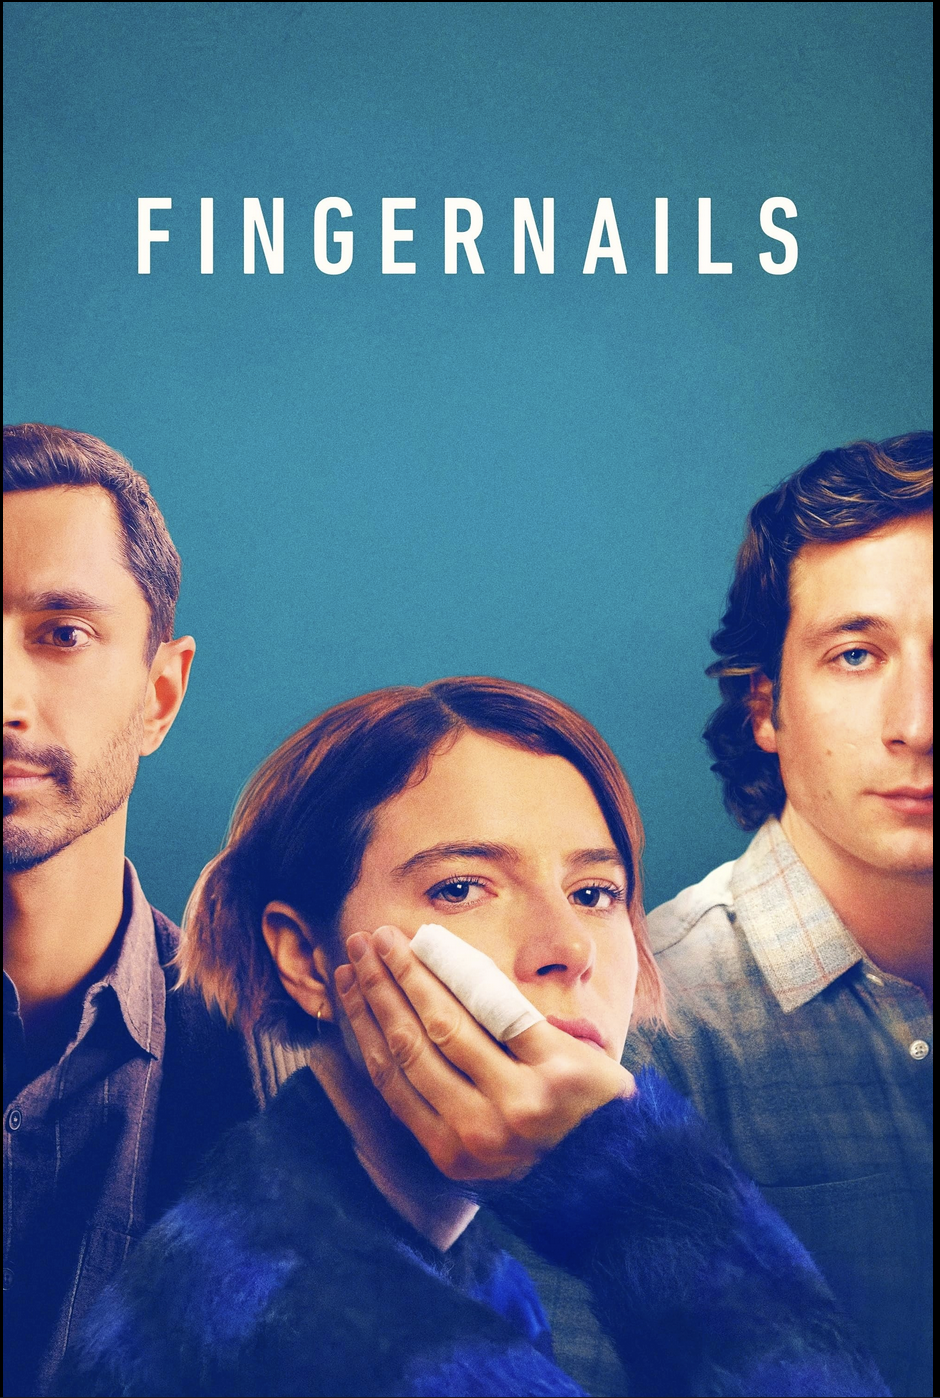 Jesse Buckley in the front with her hand on her cheeck, her pinky bandaged. Riz Ahmed and Jeremy Allen White are behind her, both with half their faces cut off. The background is teal and the title letters are white.